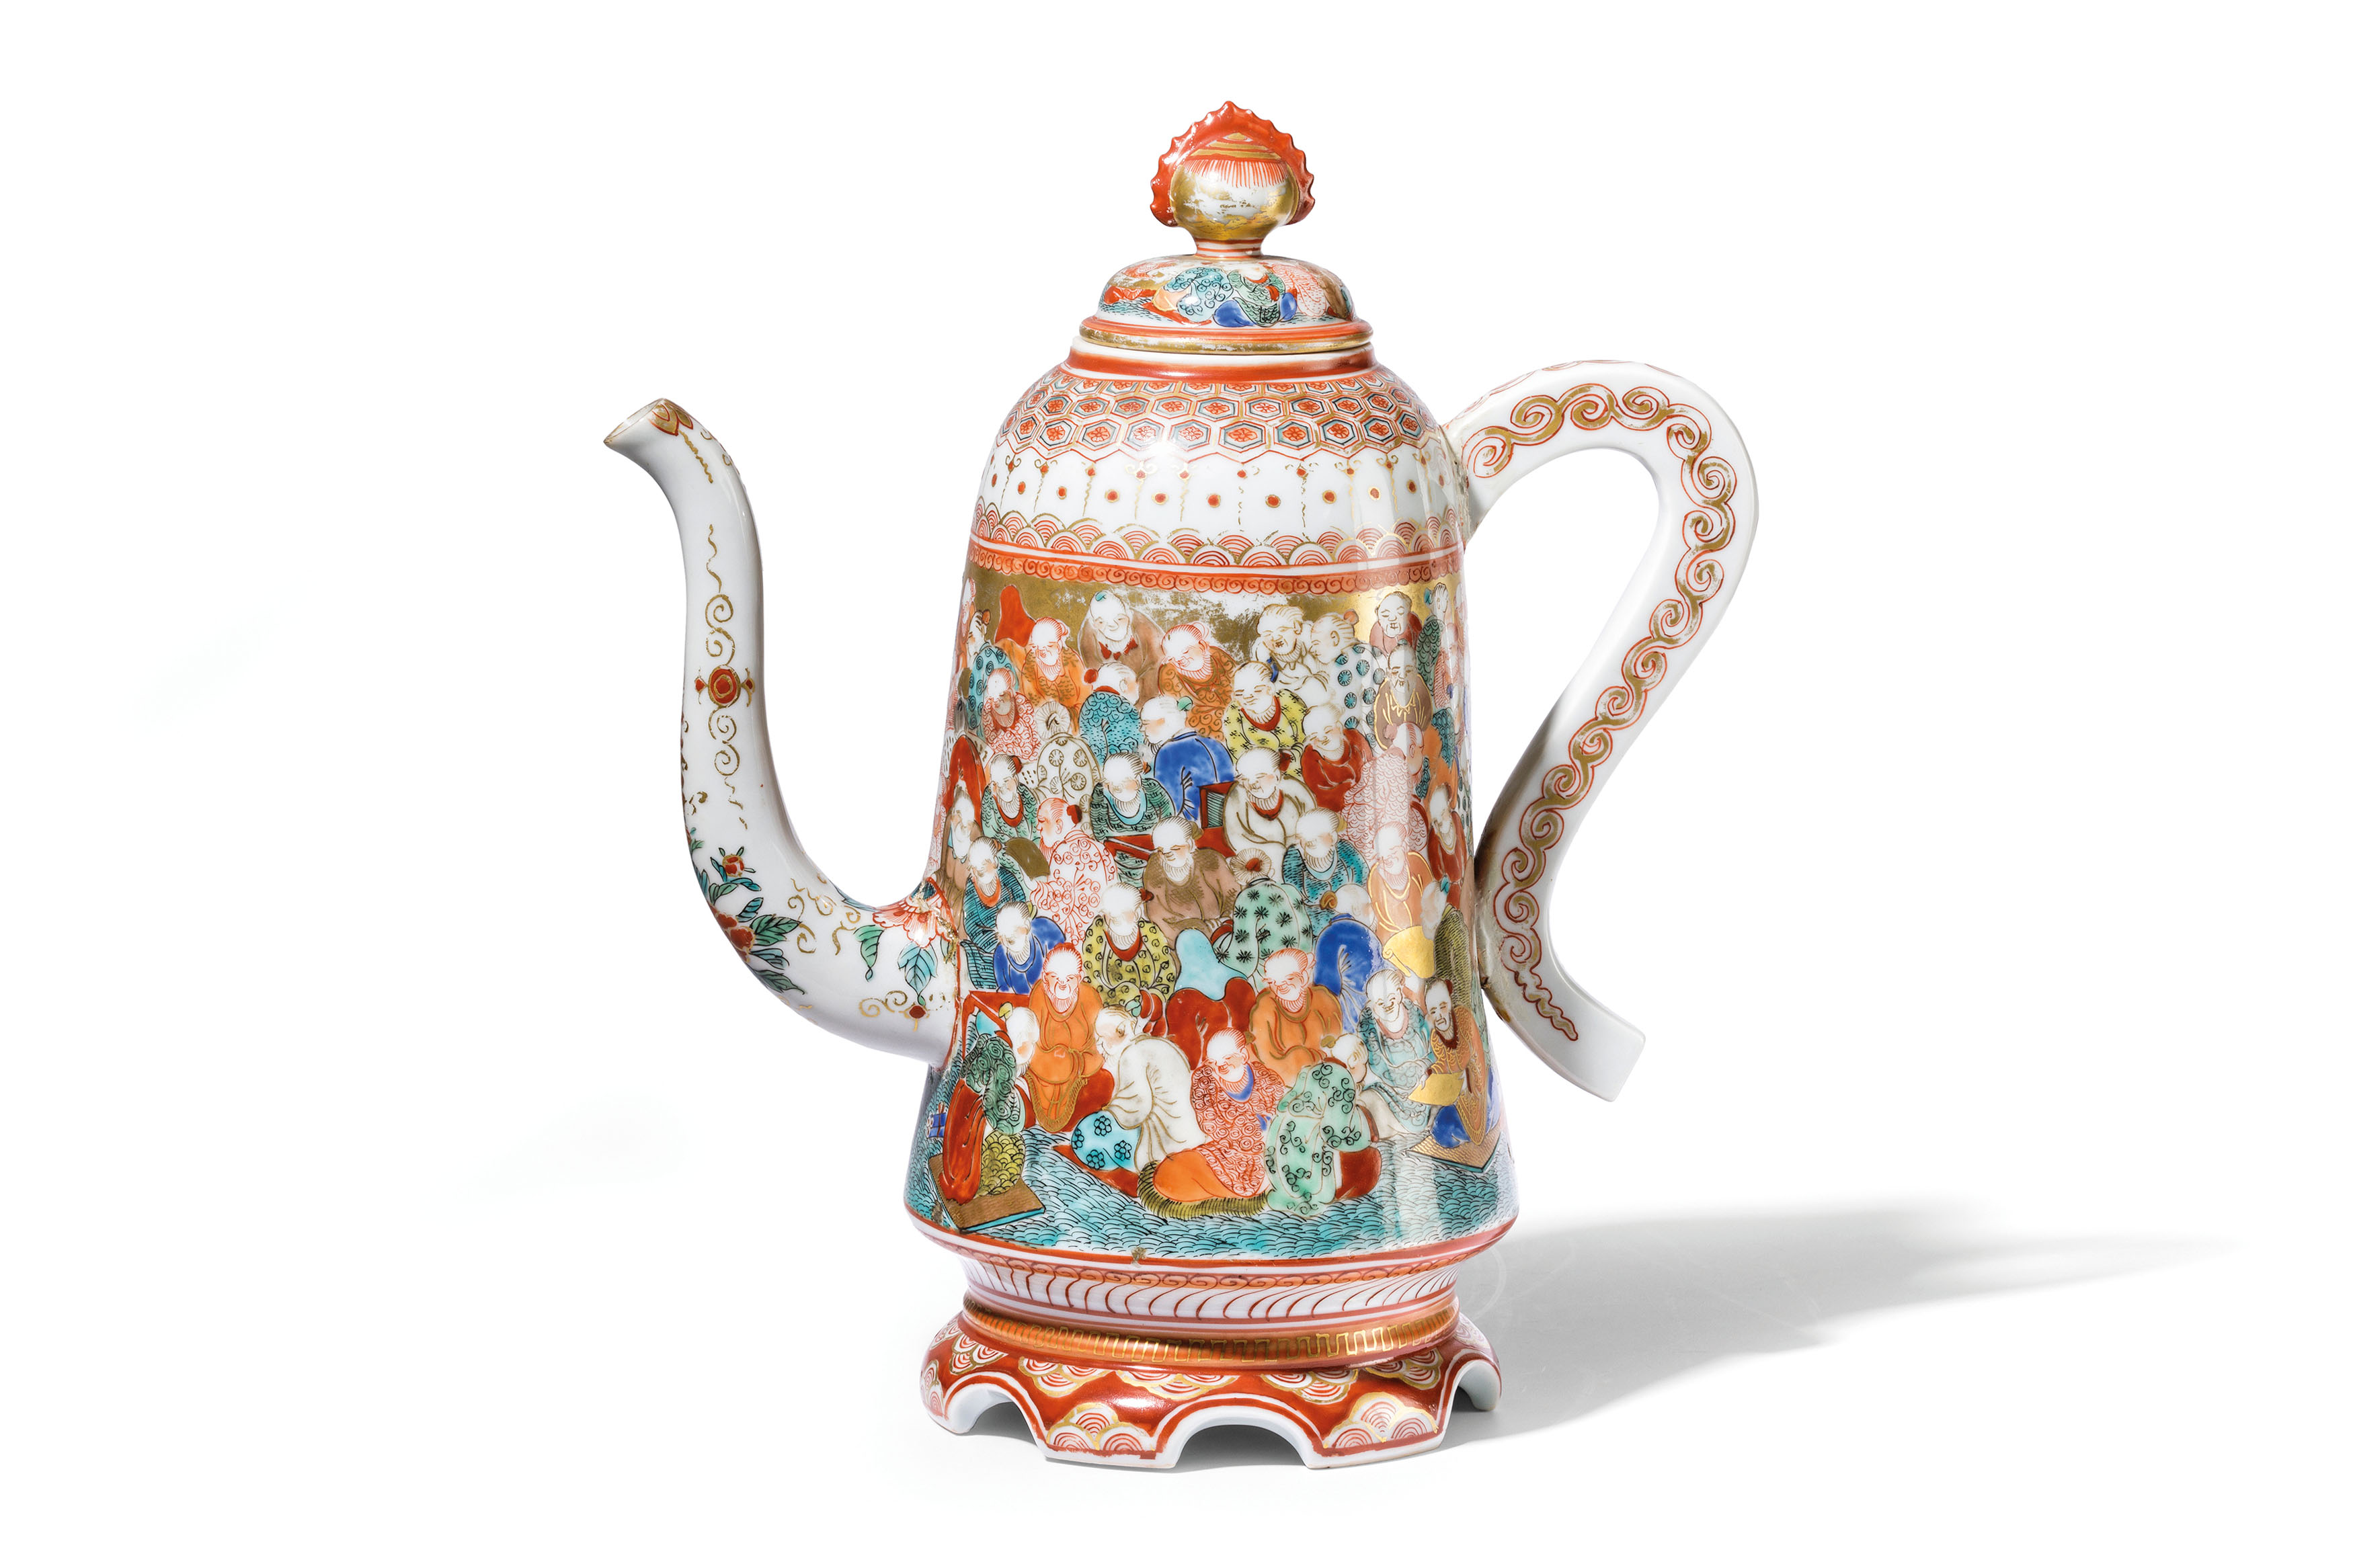 A LARGE POLICHROME PORCELAIN COFFE EWER AND COVER, JAPAN, 18TH CENTURY - Image 4 of 6